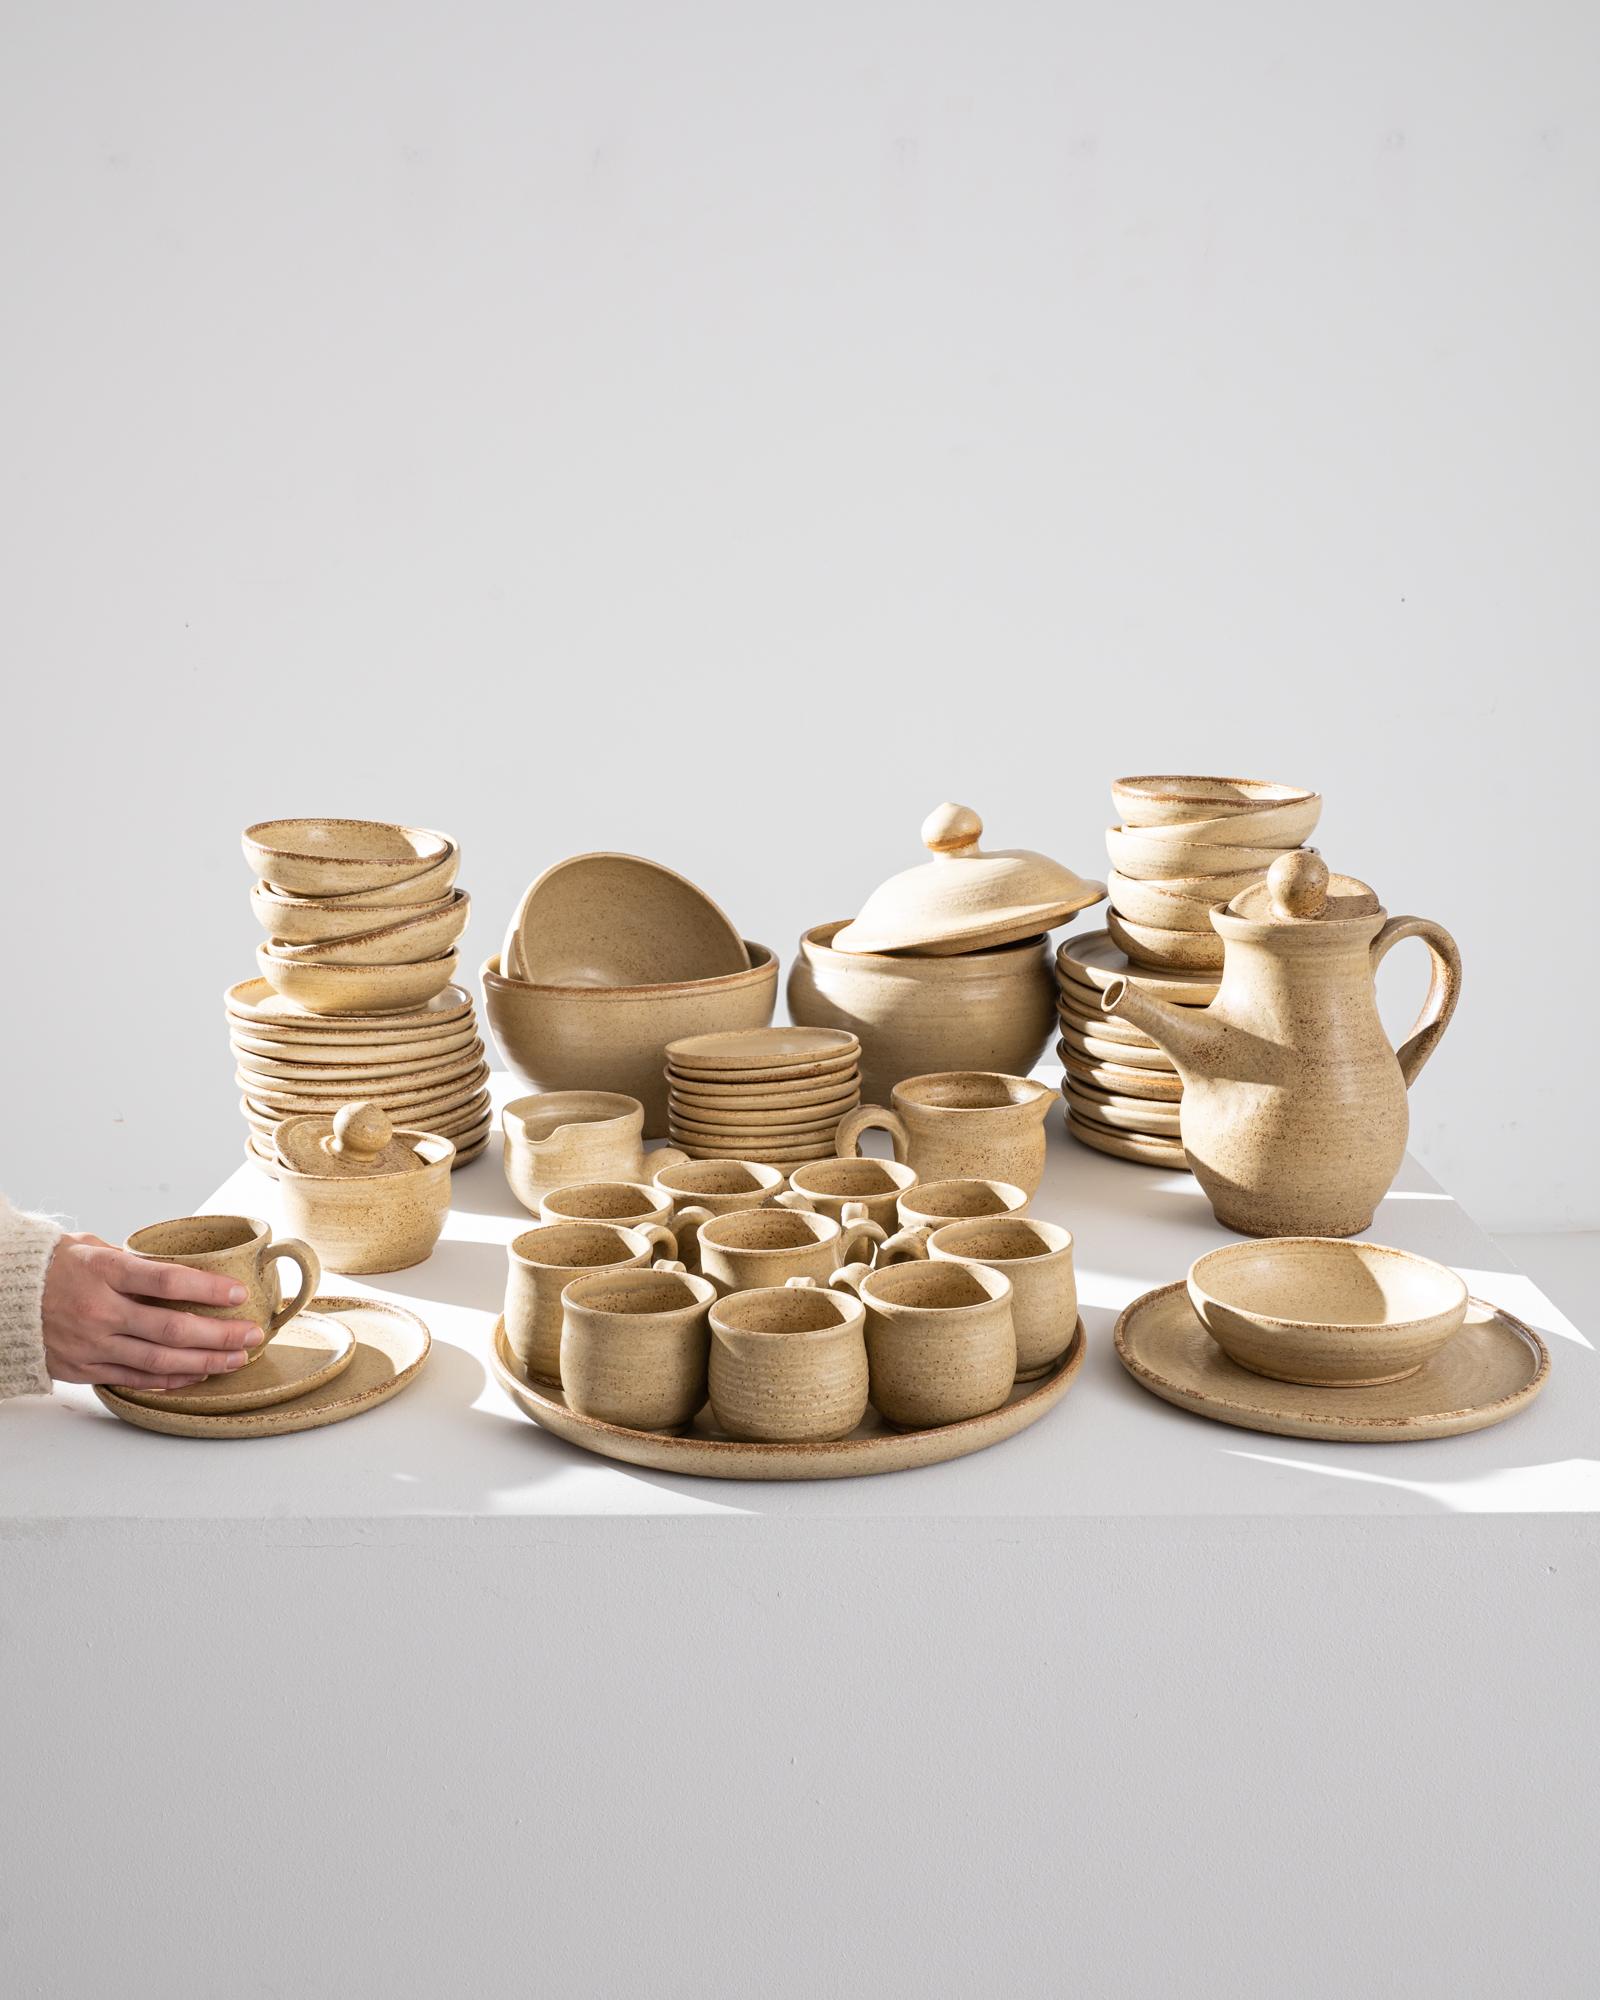 This vintage stoneware dinner set possesses a timeless rustic charm. Made in Belgium in the 1970s, these pieces were fired at high temperatures, granting them durability, longevity, and a distinctive heft. The rounded forms of the cups, bowls,